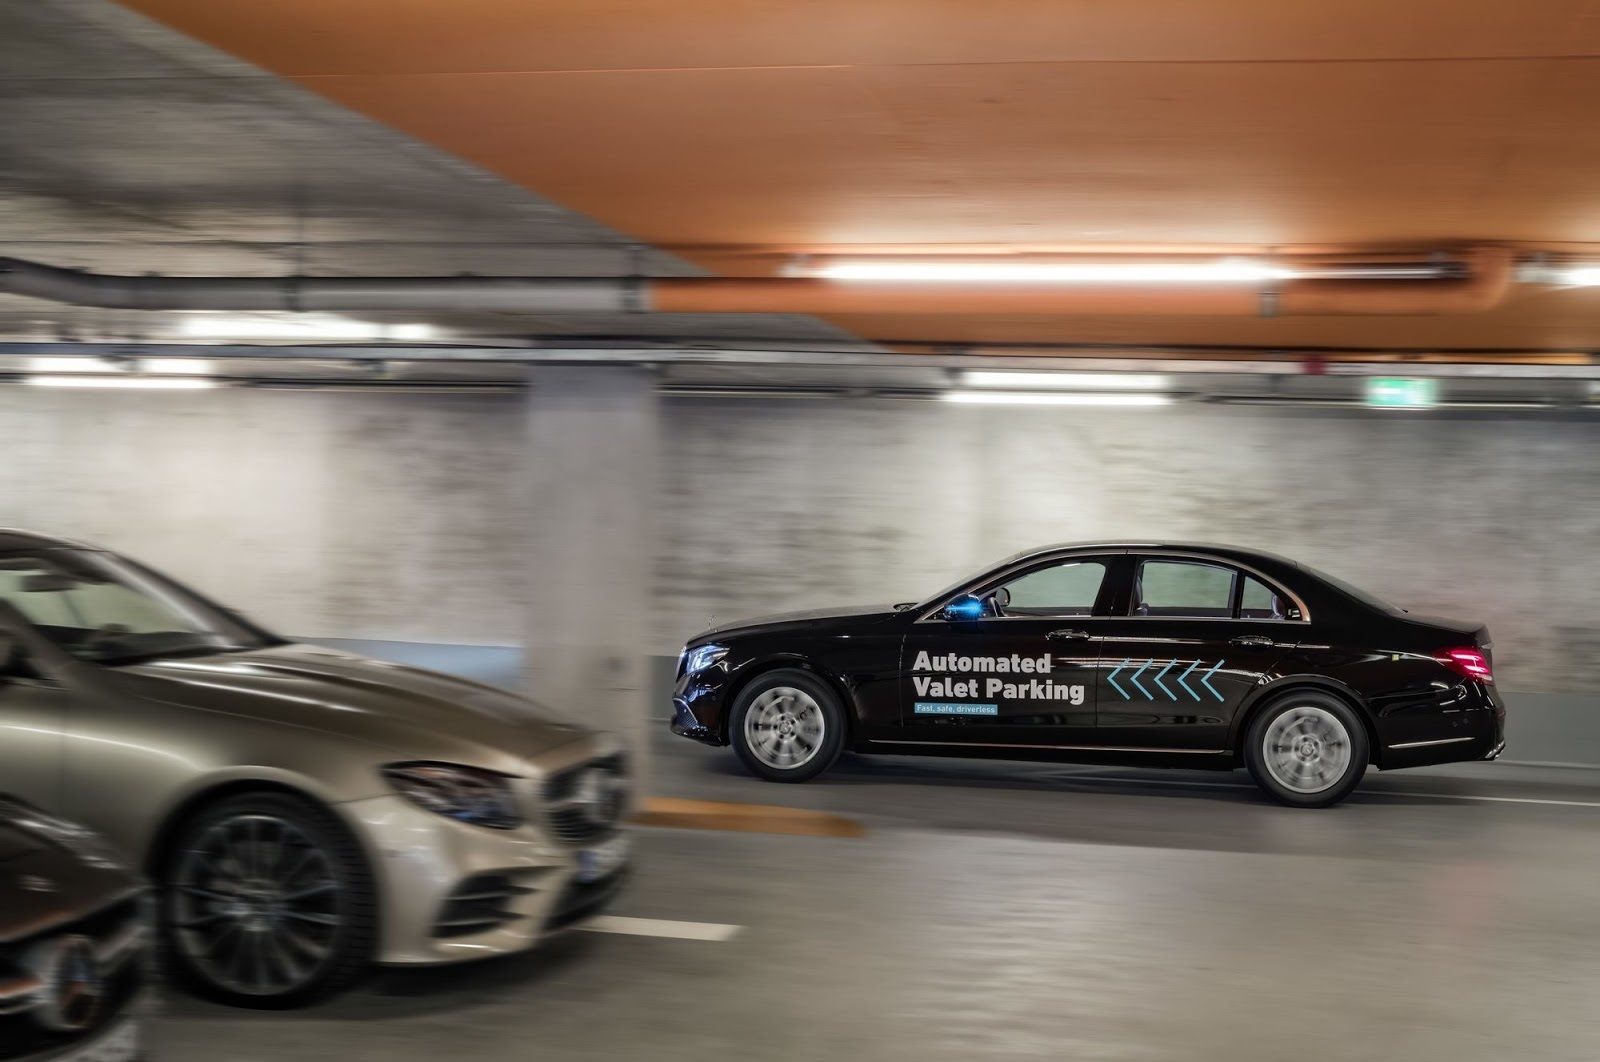 Mercedes Automated Valet Parking